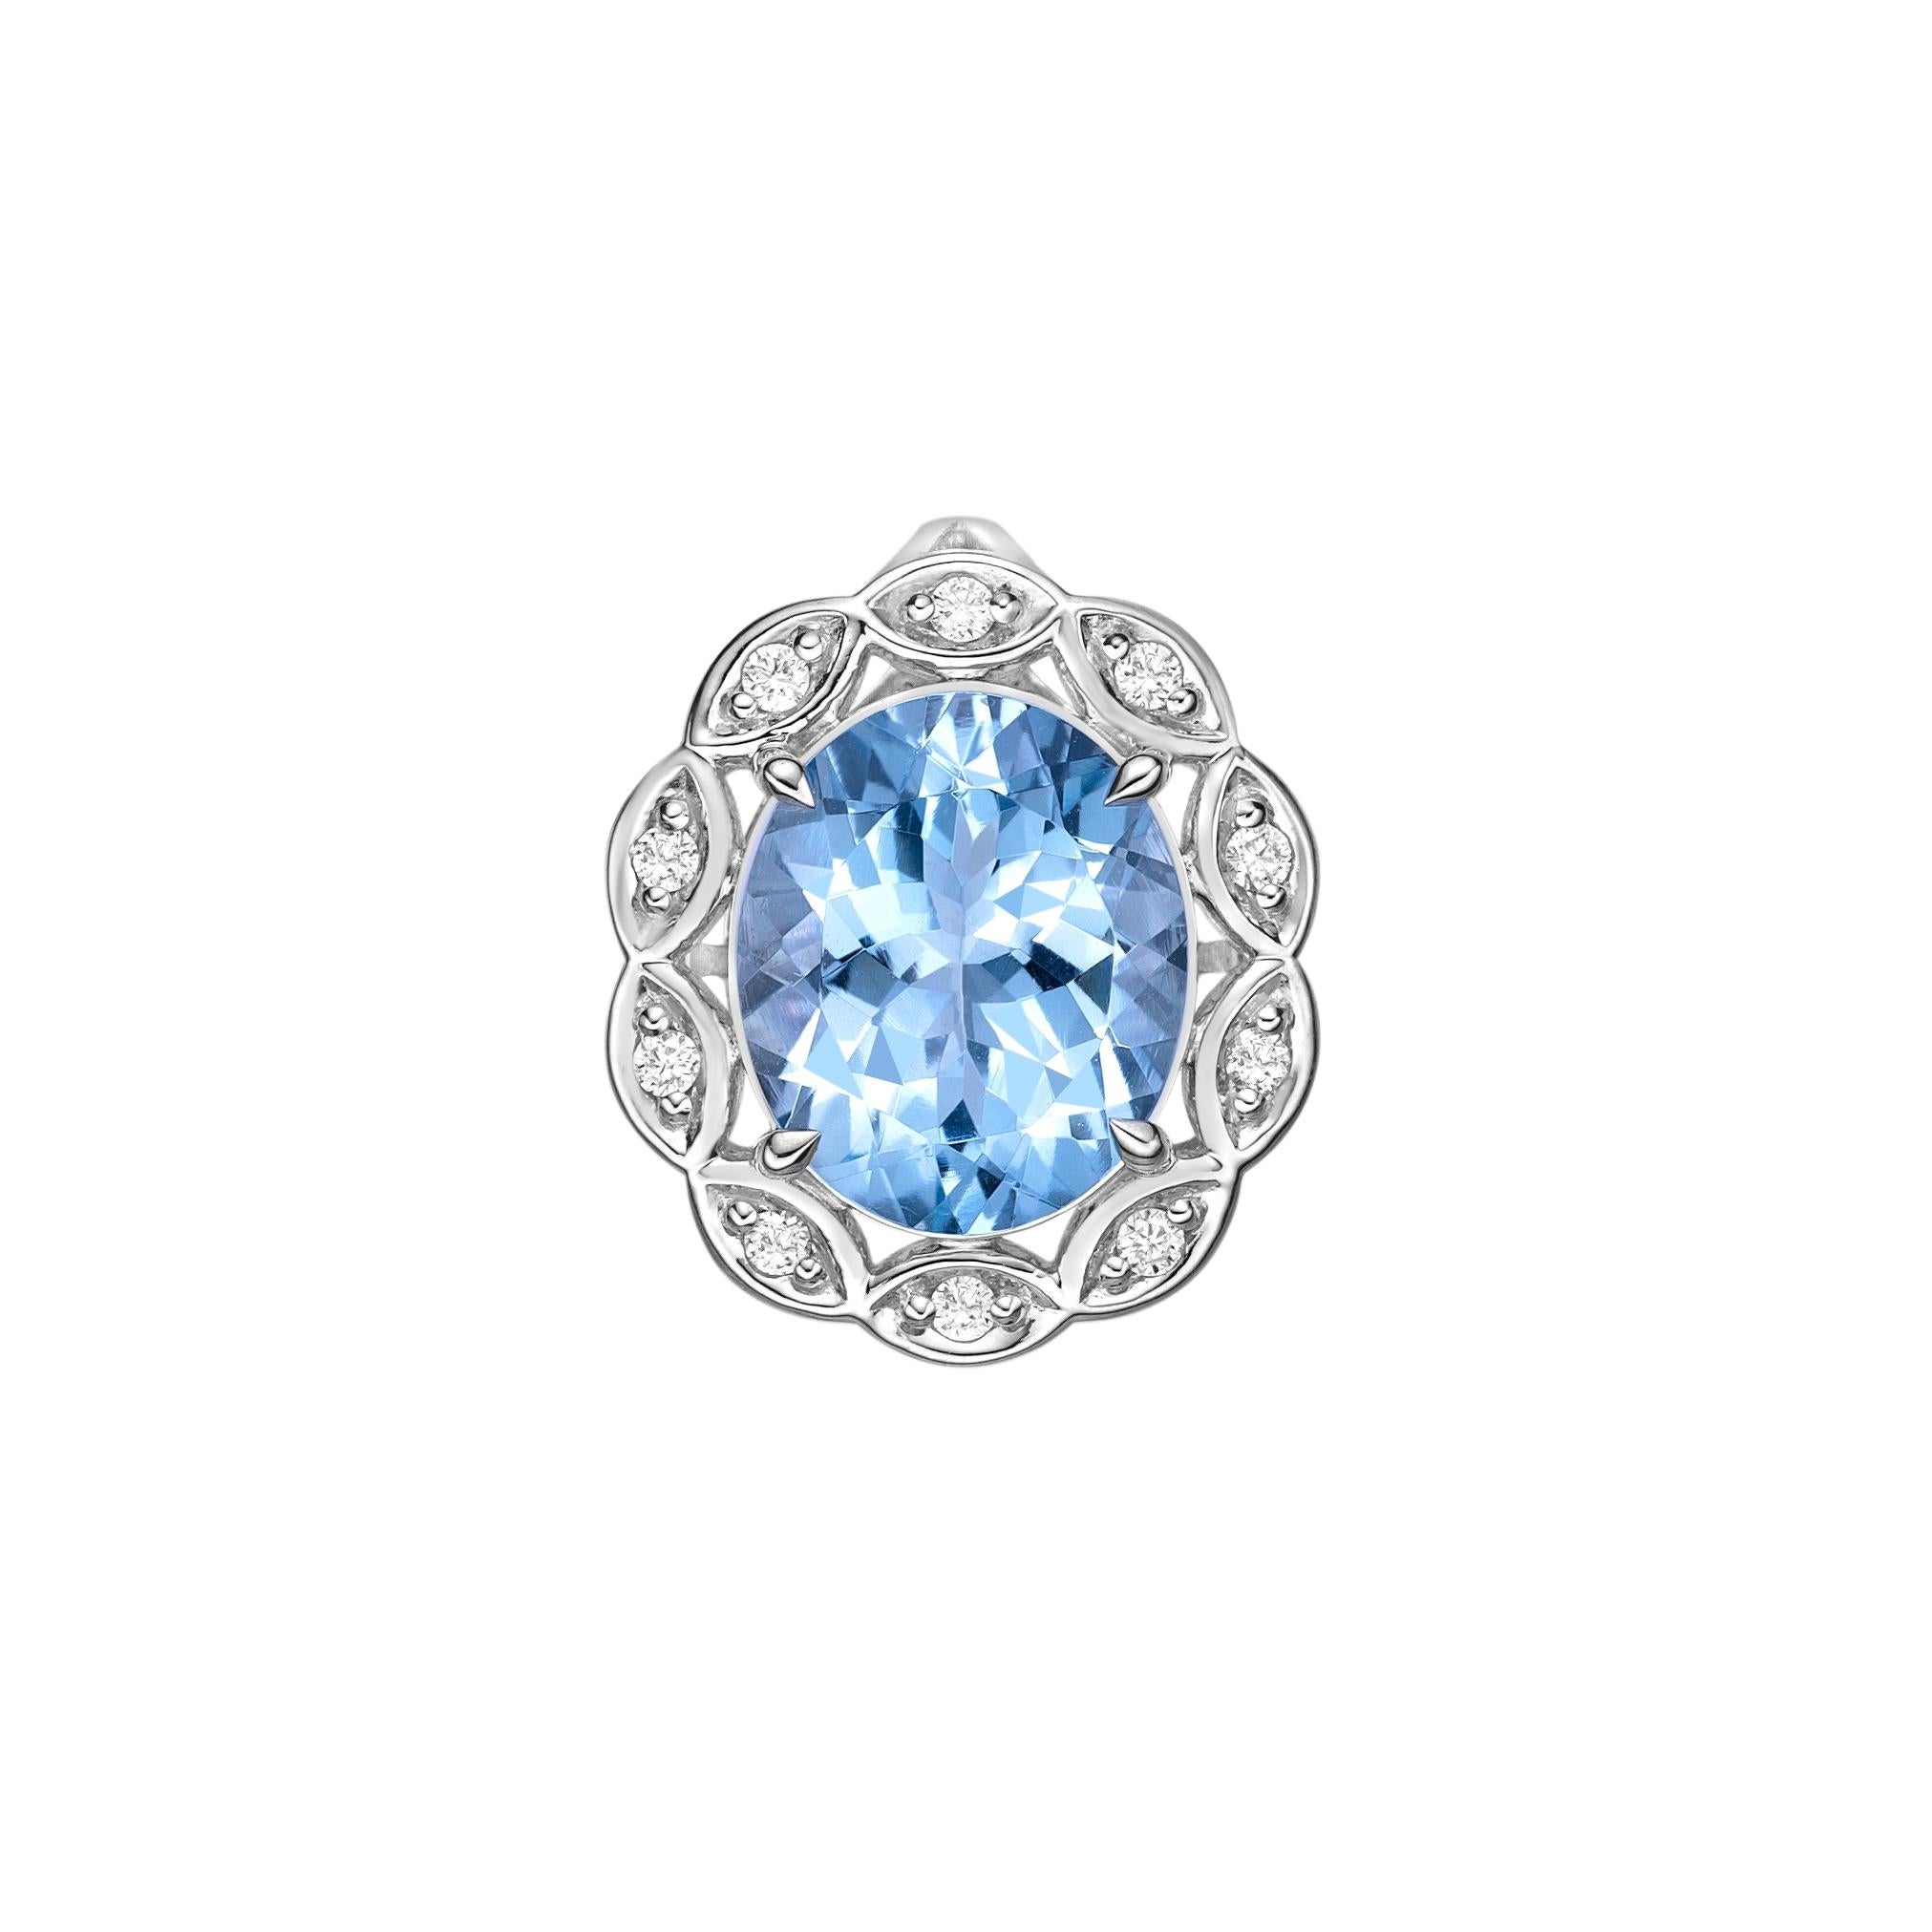 Oval Cut 3.80 Carat Aquamarine Ring in 18Karat White Gold with White Diamond. For Sale